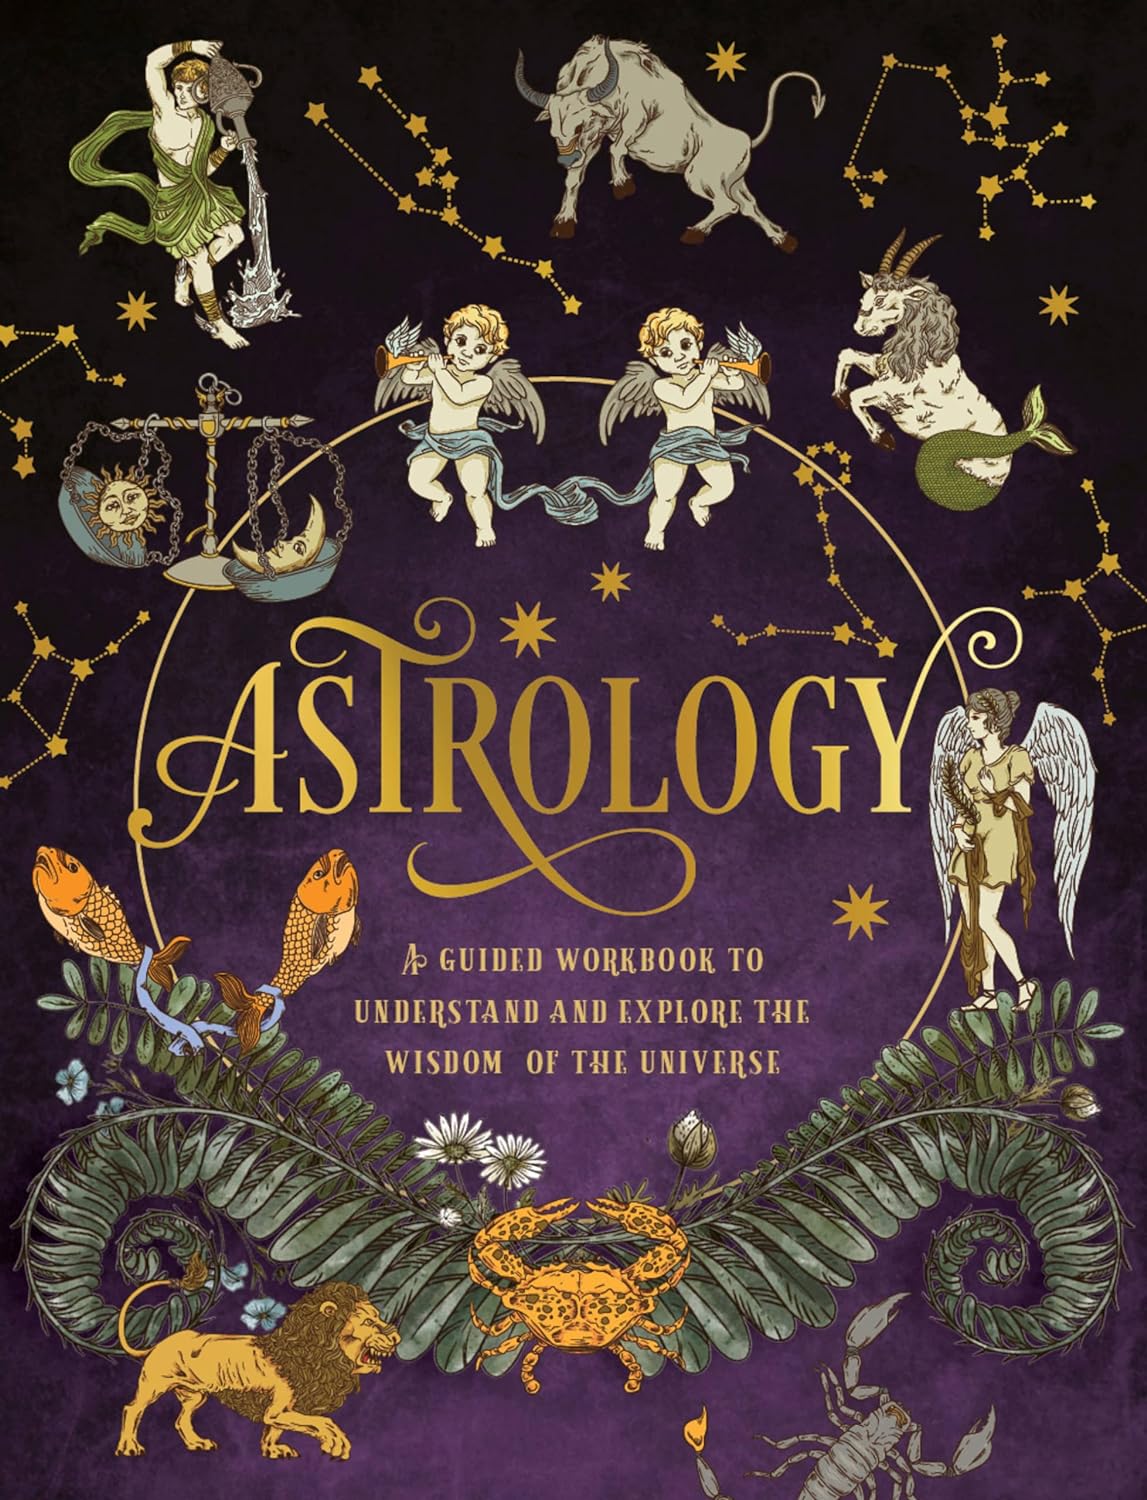 Astrology - A Guided Workbook to Understand & Explore the Universe